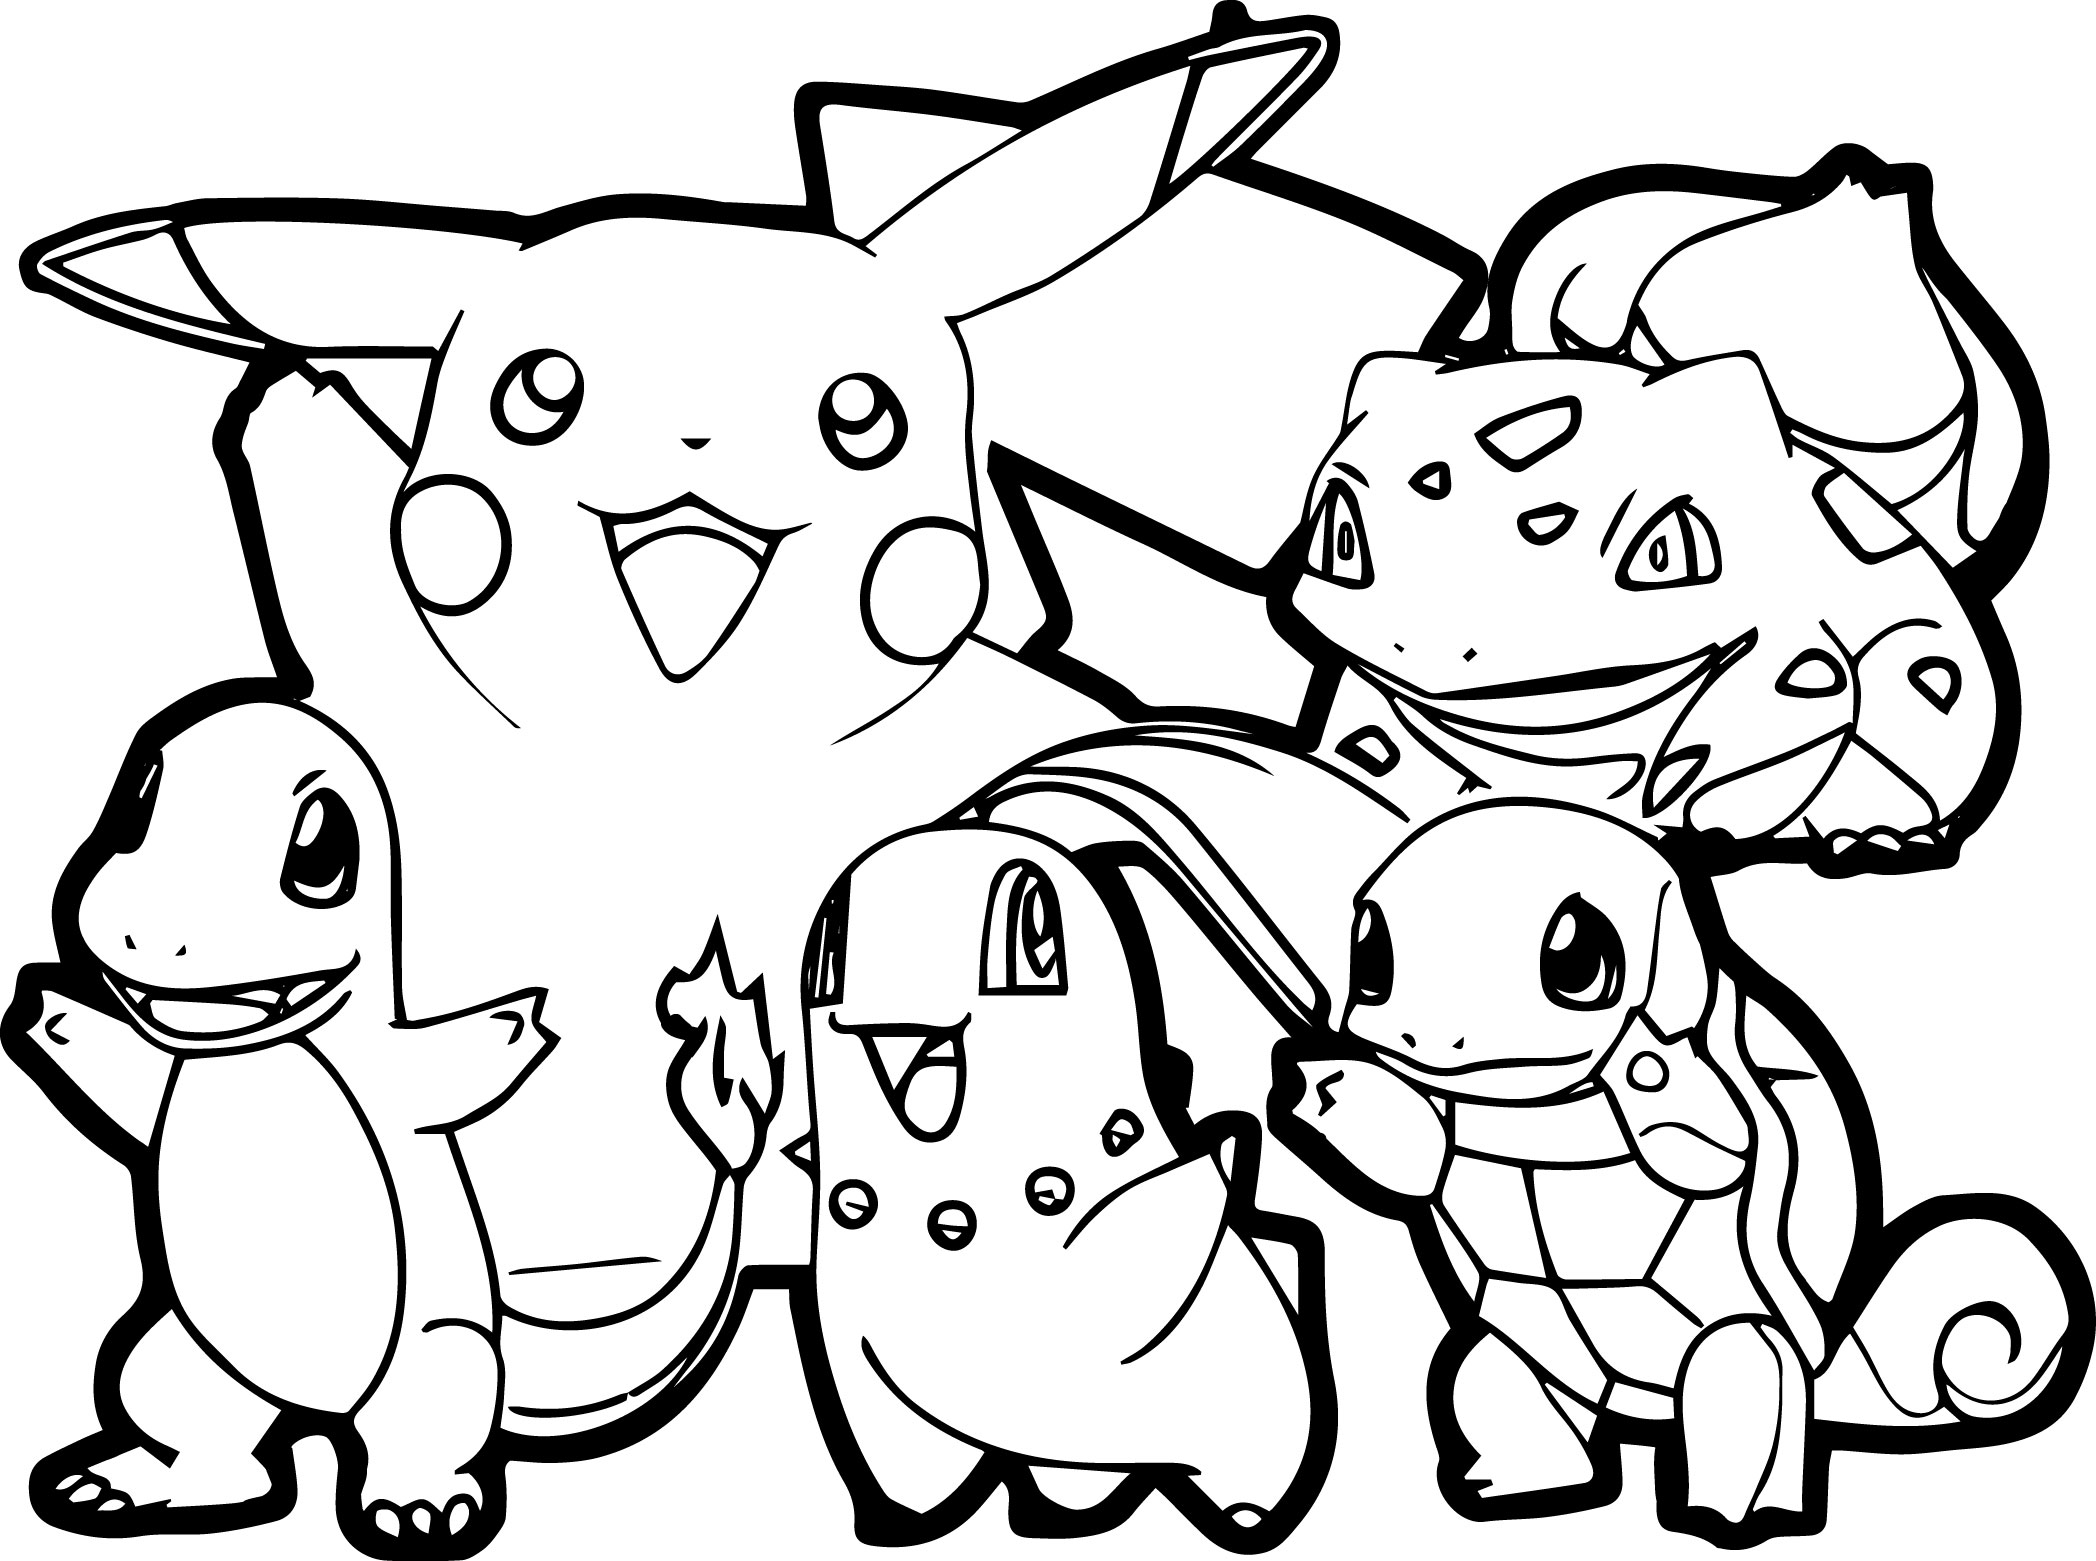 pokemon black and white coloring pages